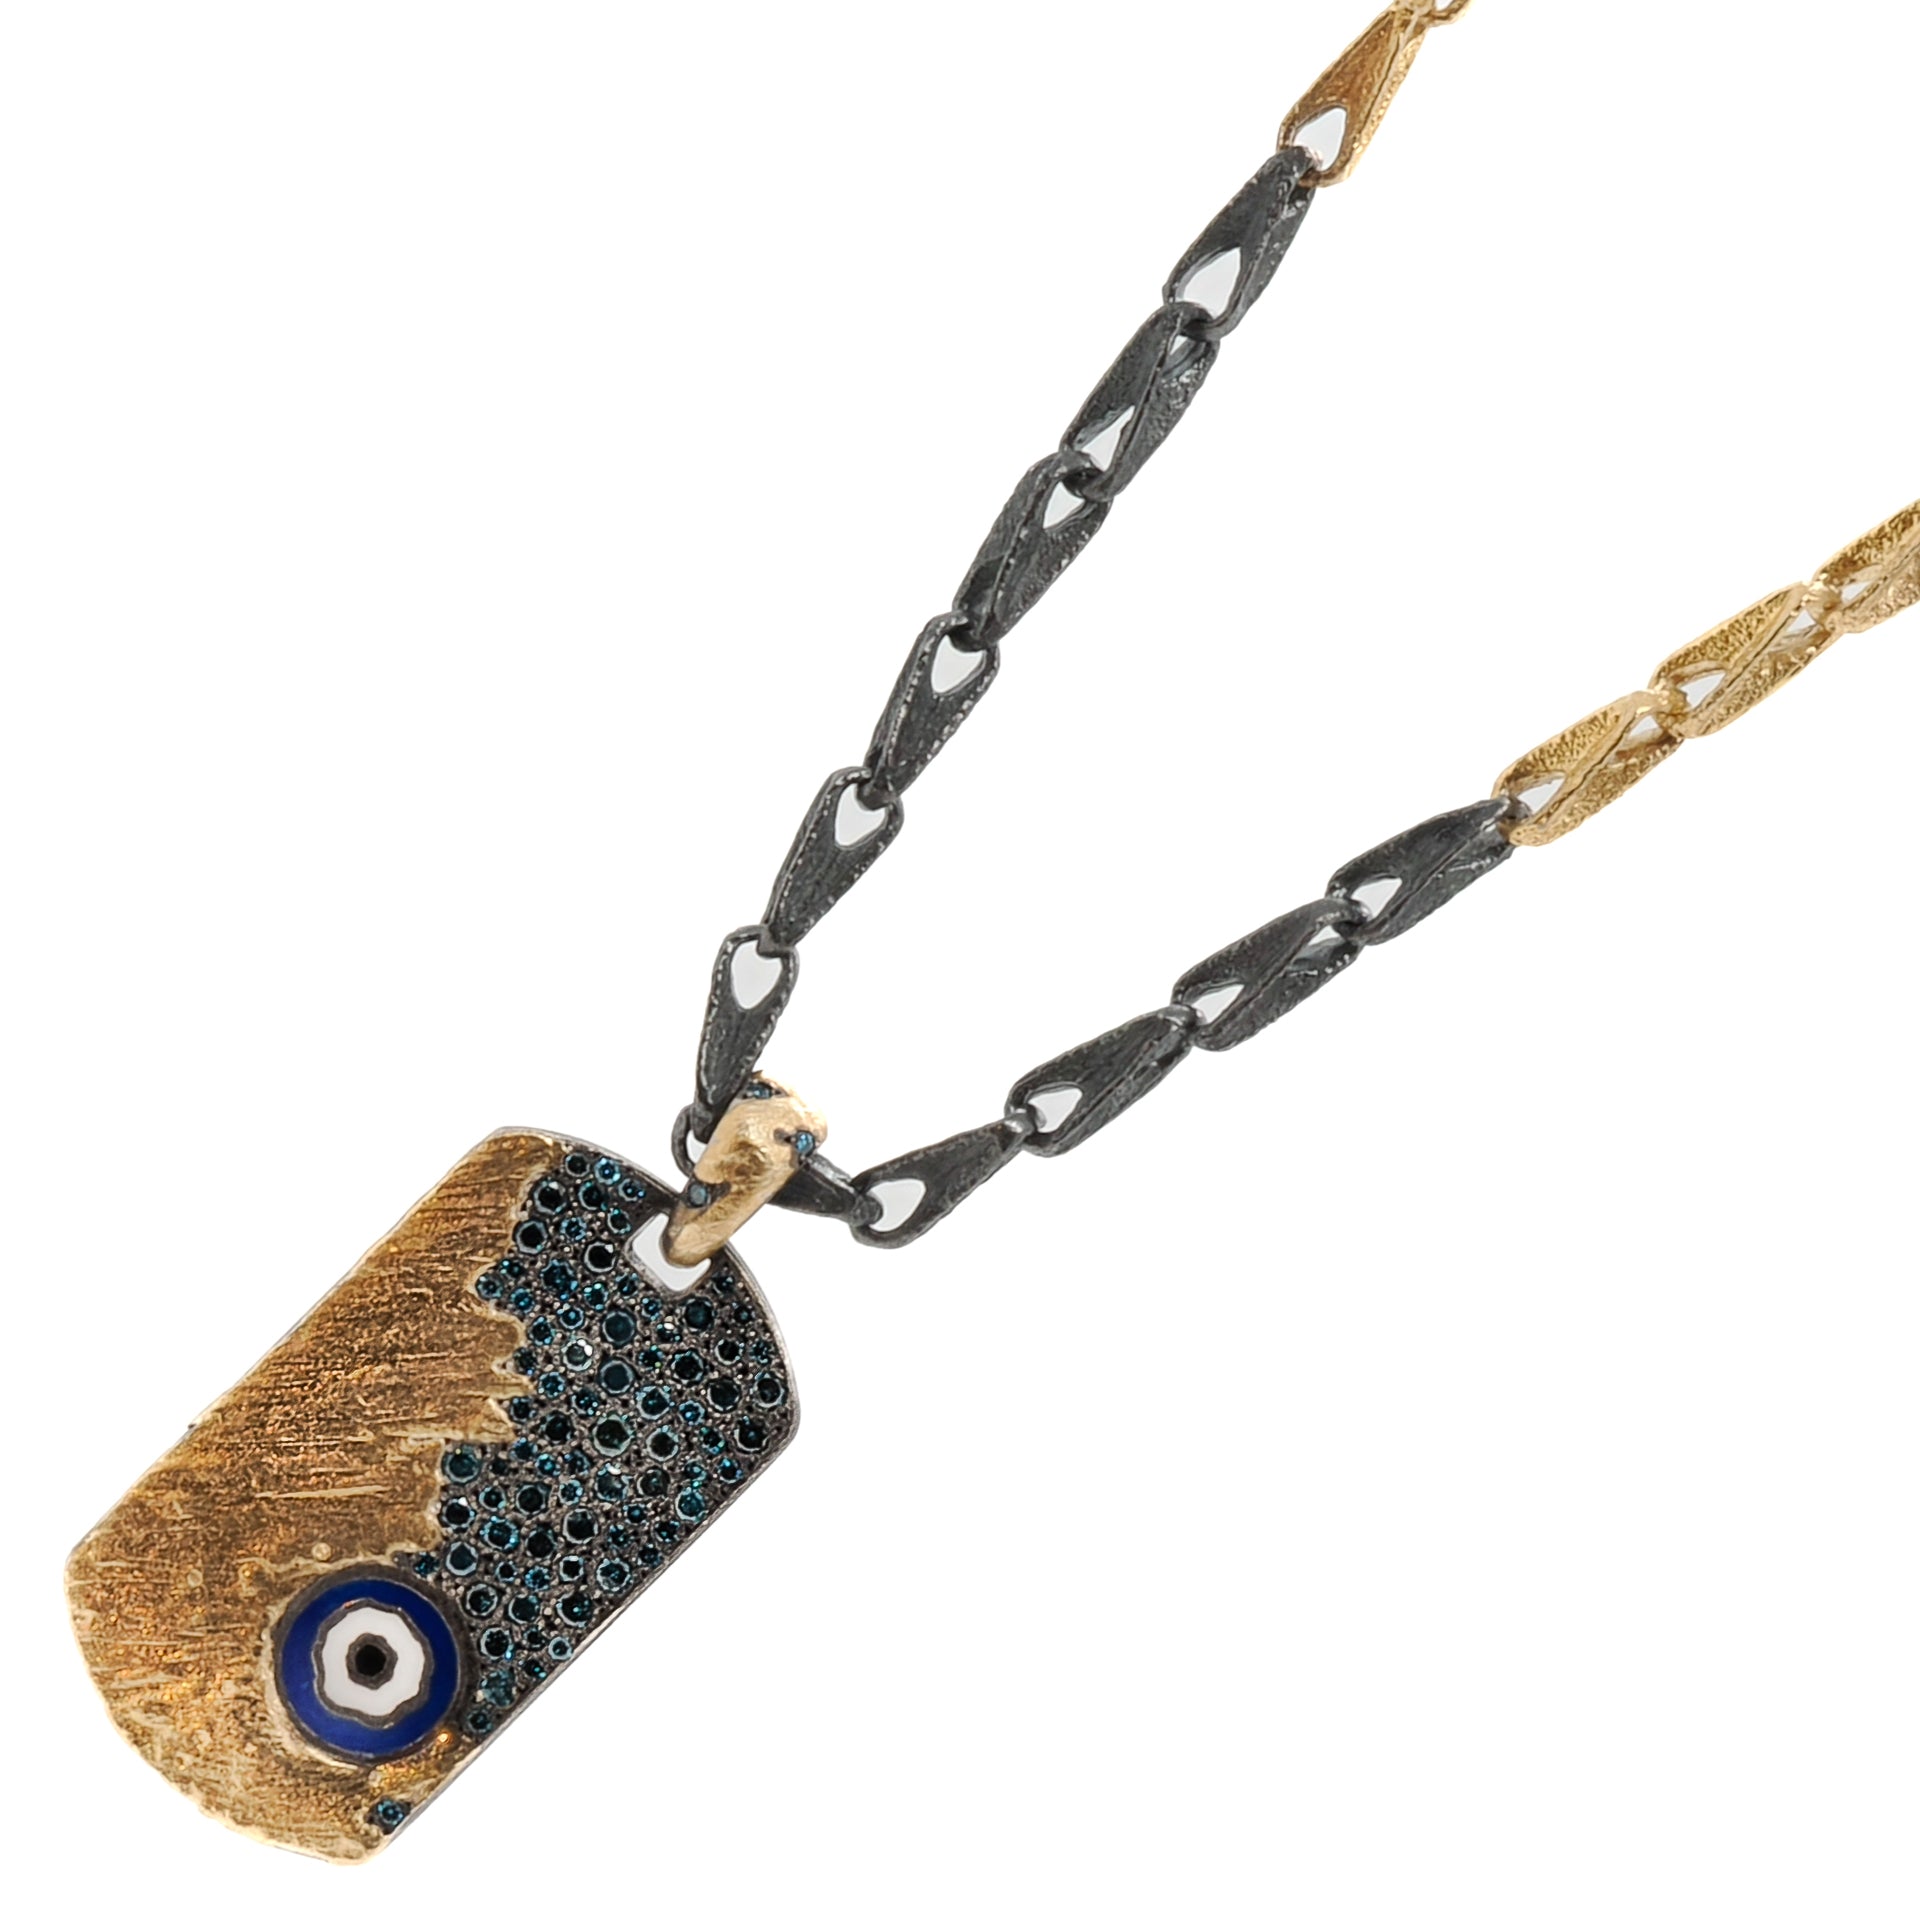 Detailed shot of the rough silver and gold surfaces of the Nature Dog Tag Evil Eye Necklace, highlighting the unique and imperfectly finished nature of the piece.